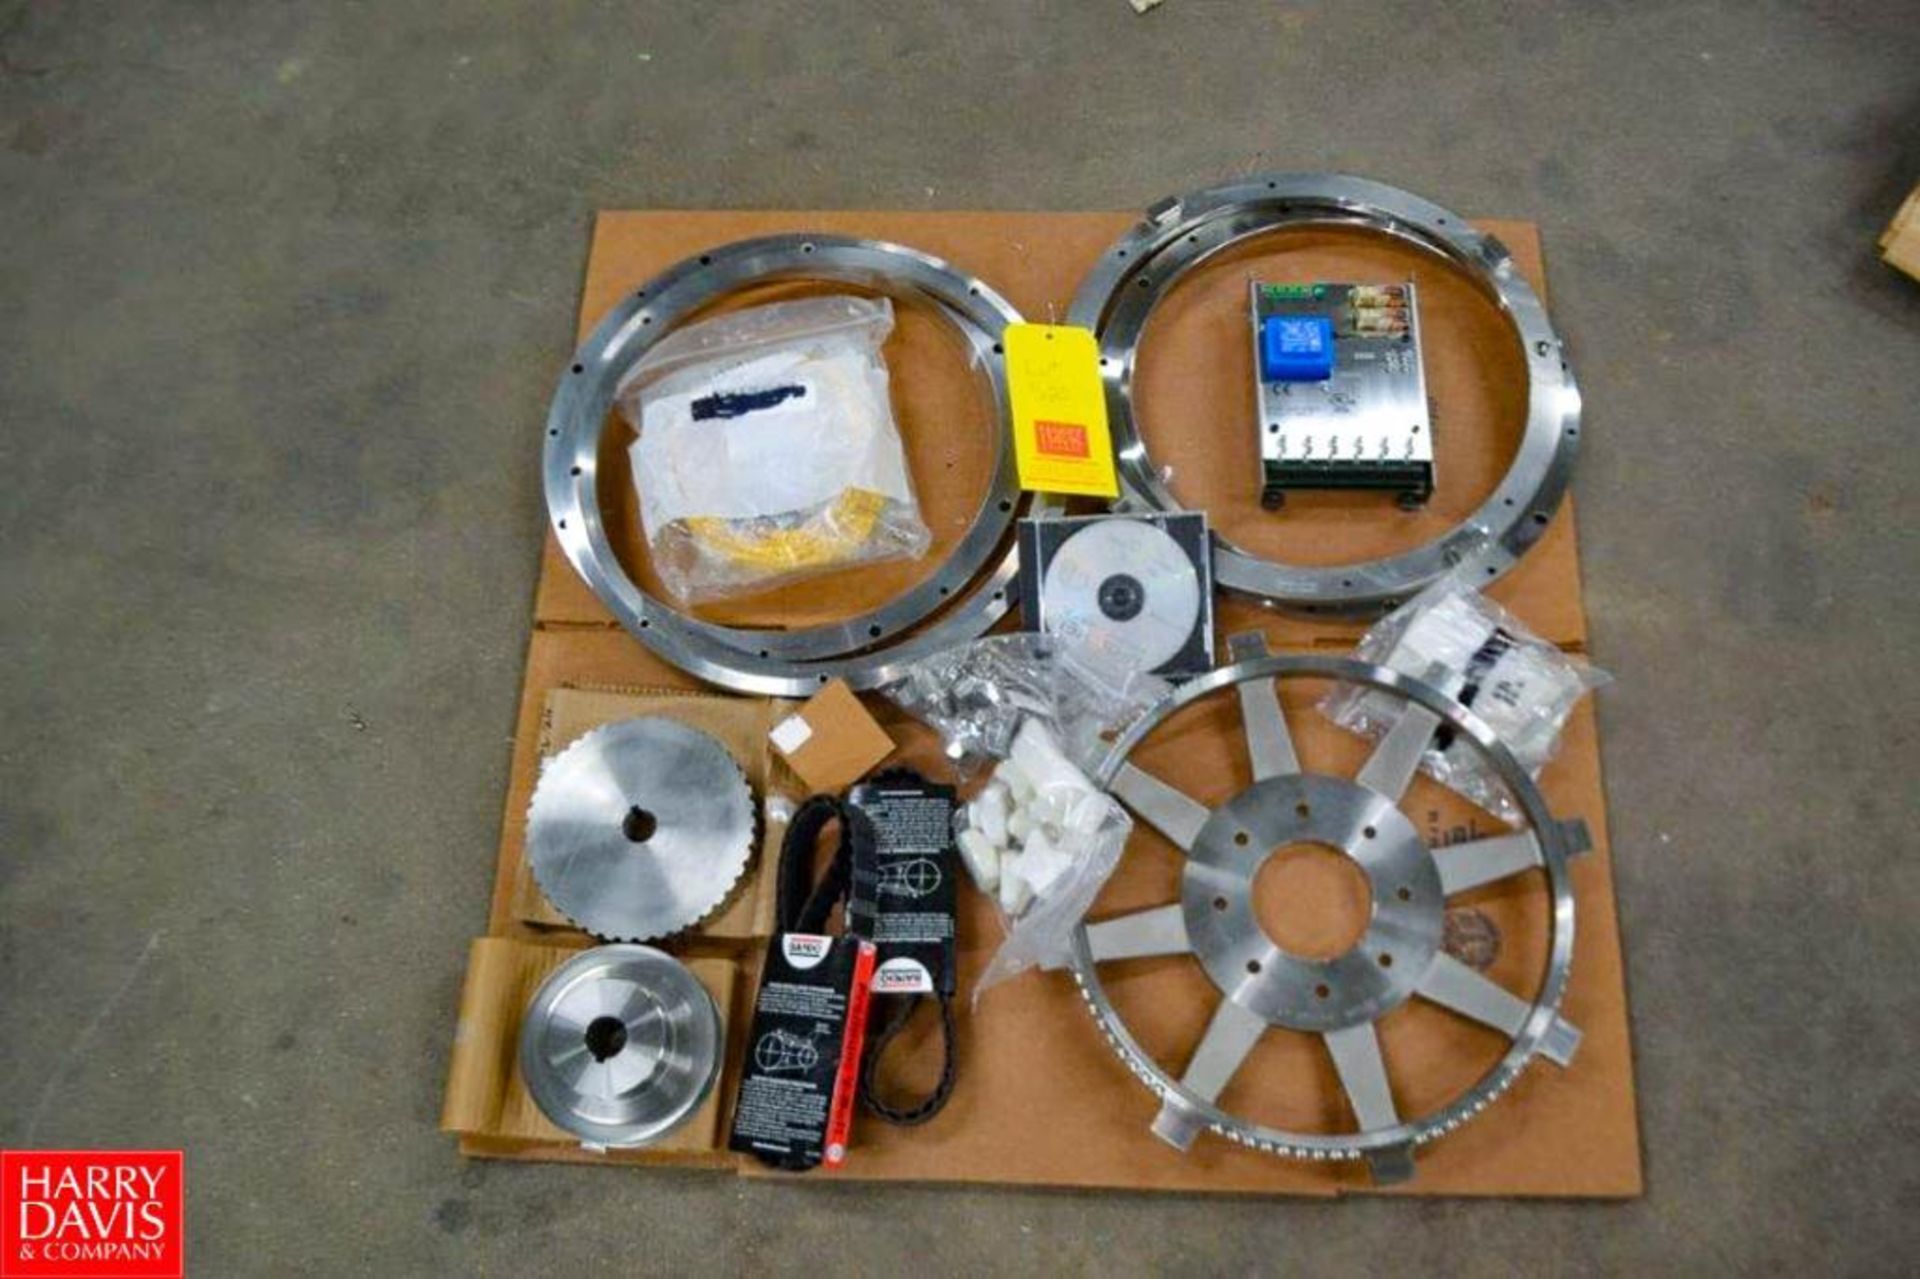 Urschel Parts Includes (4) Support Adapter Rings, (1) Cutting Head Locking Ring, (2) Timing Pulleys,